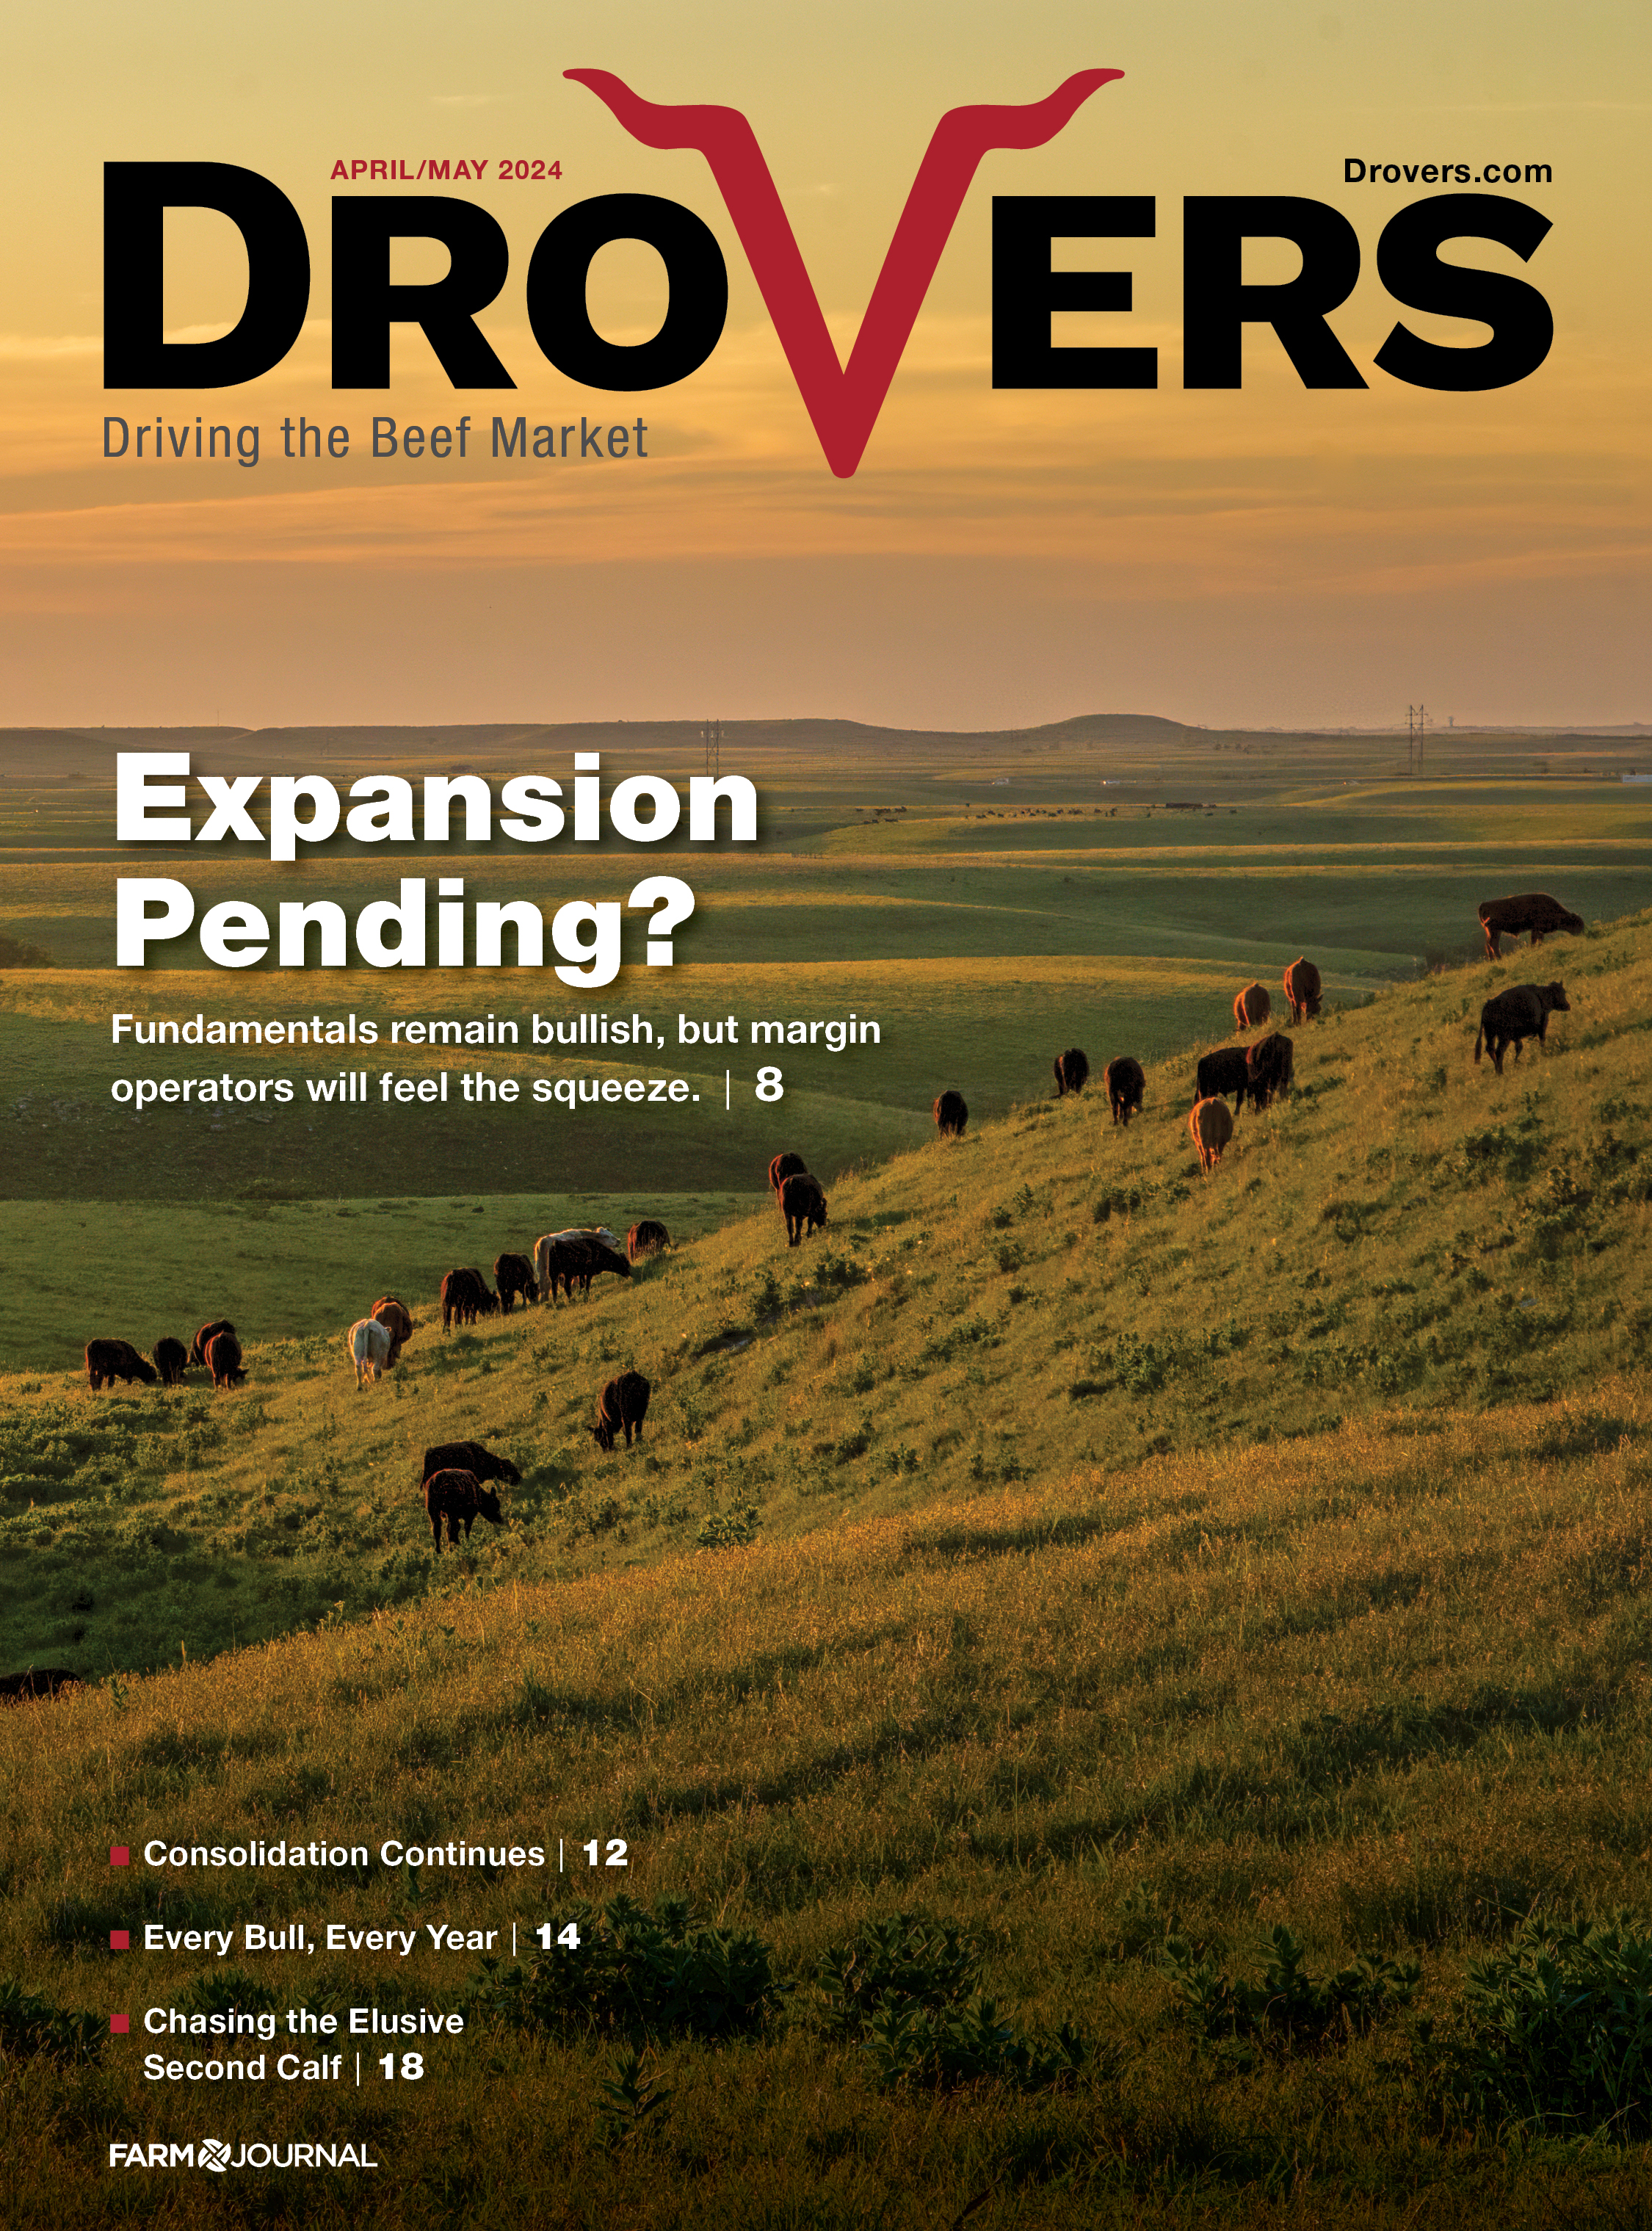  Drovers April May 2024 cover 